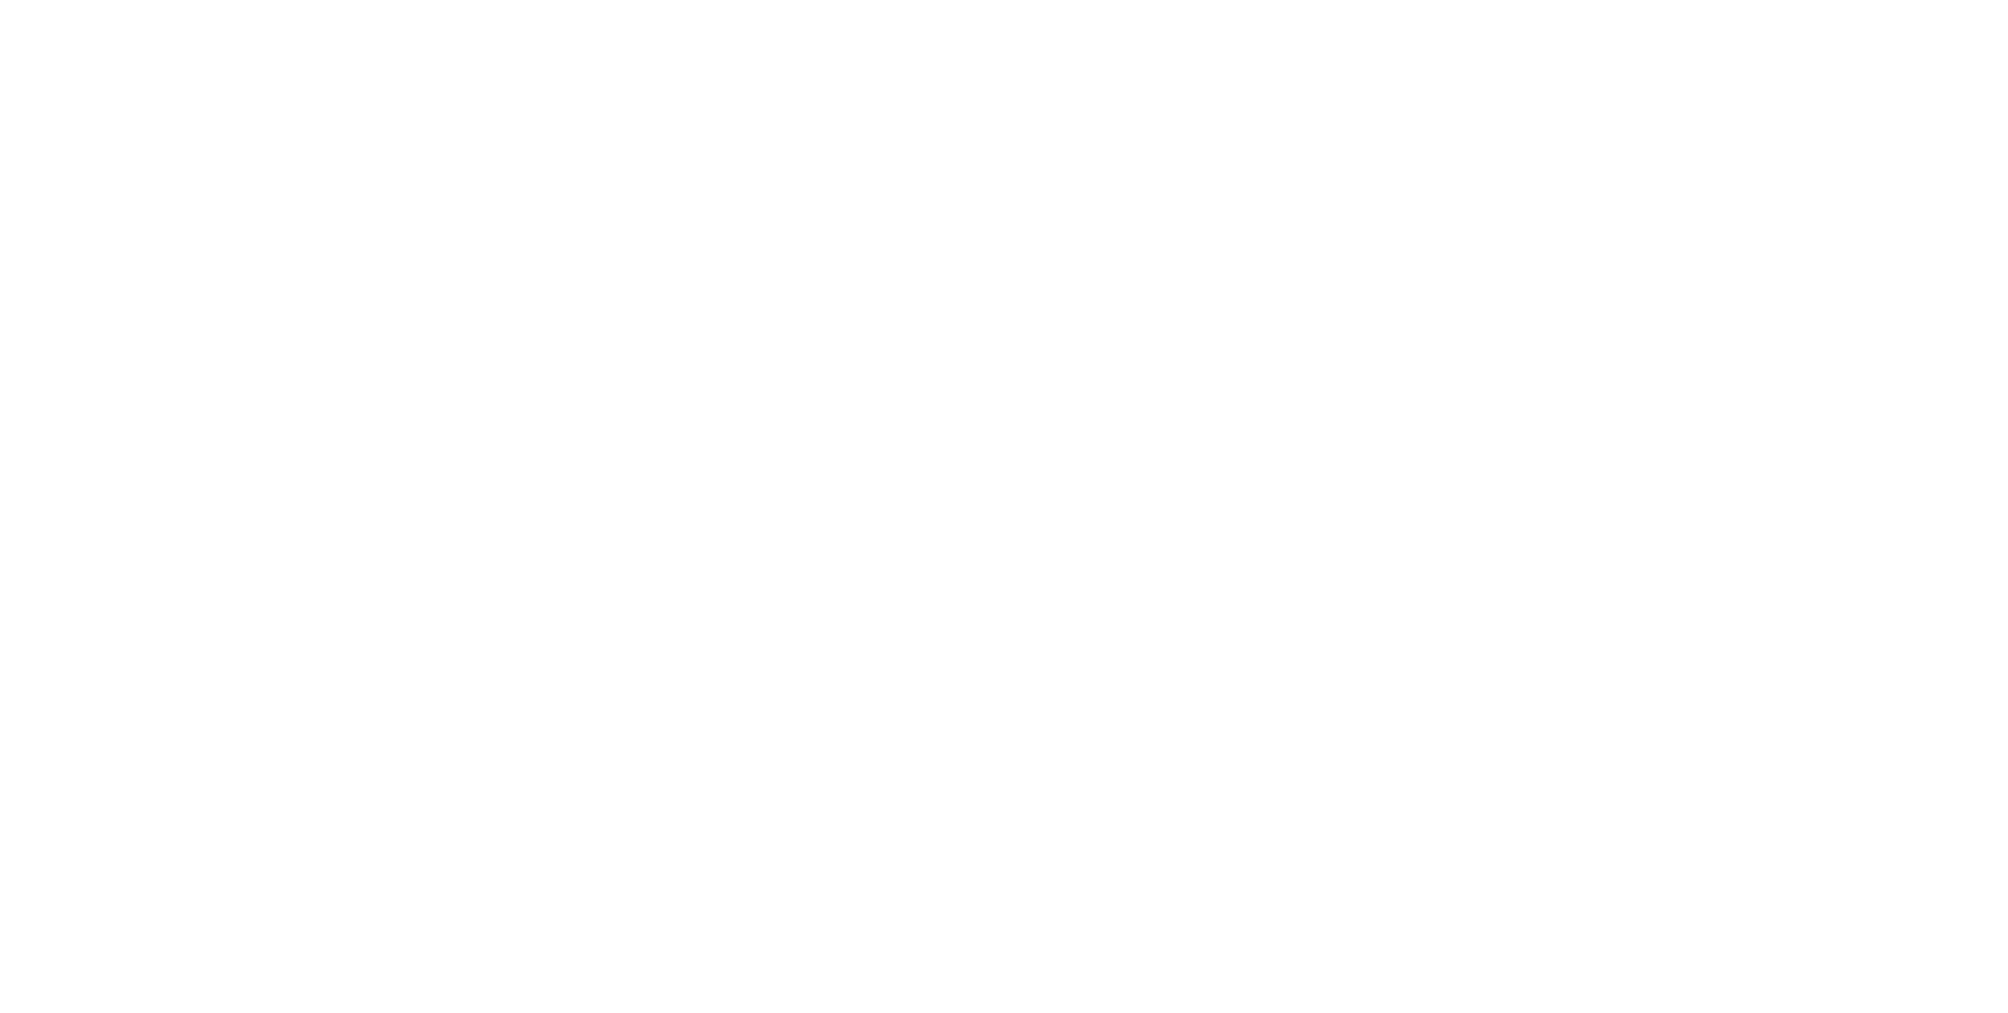 The E-Coolpac independent battery brings Innovation and Sustainability to your fleet When it comes to refrigerated re...